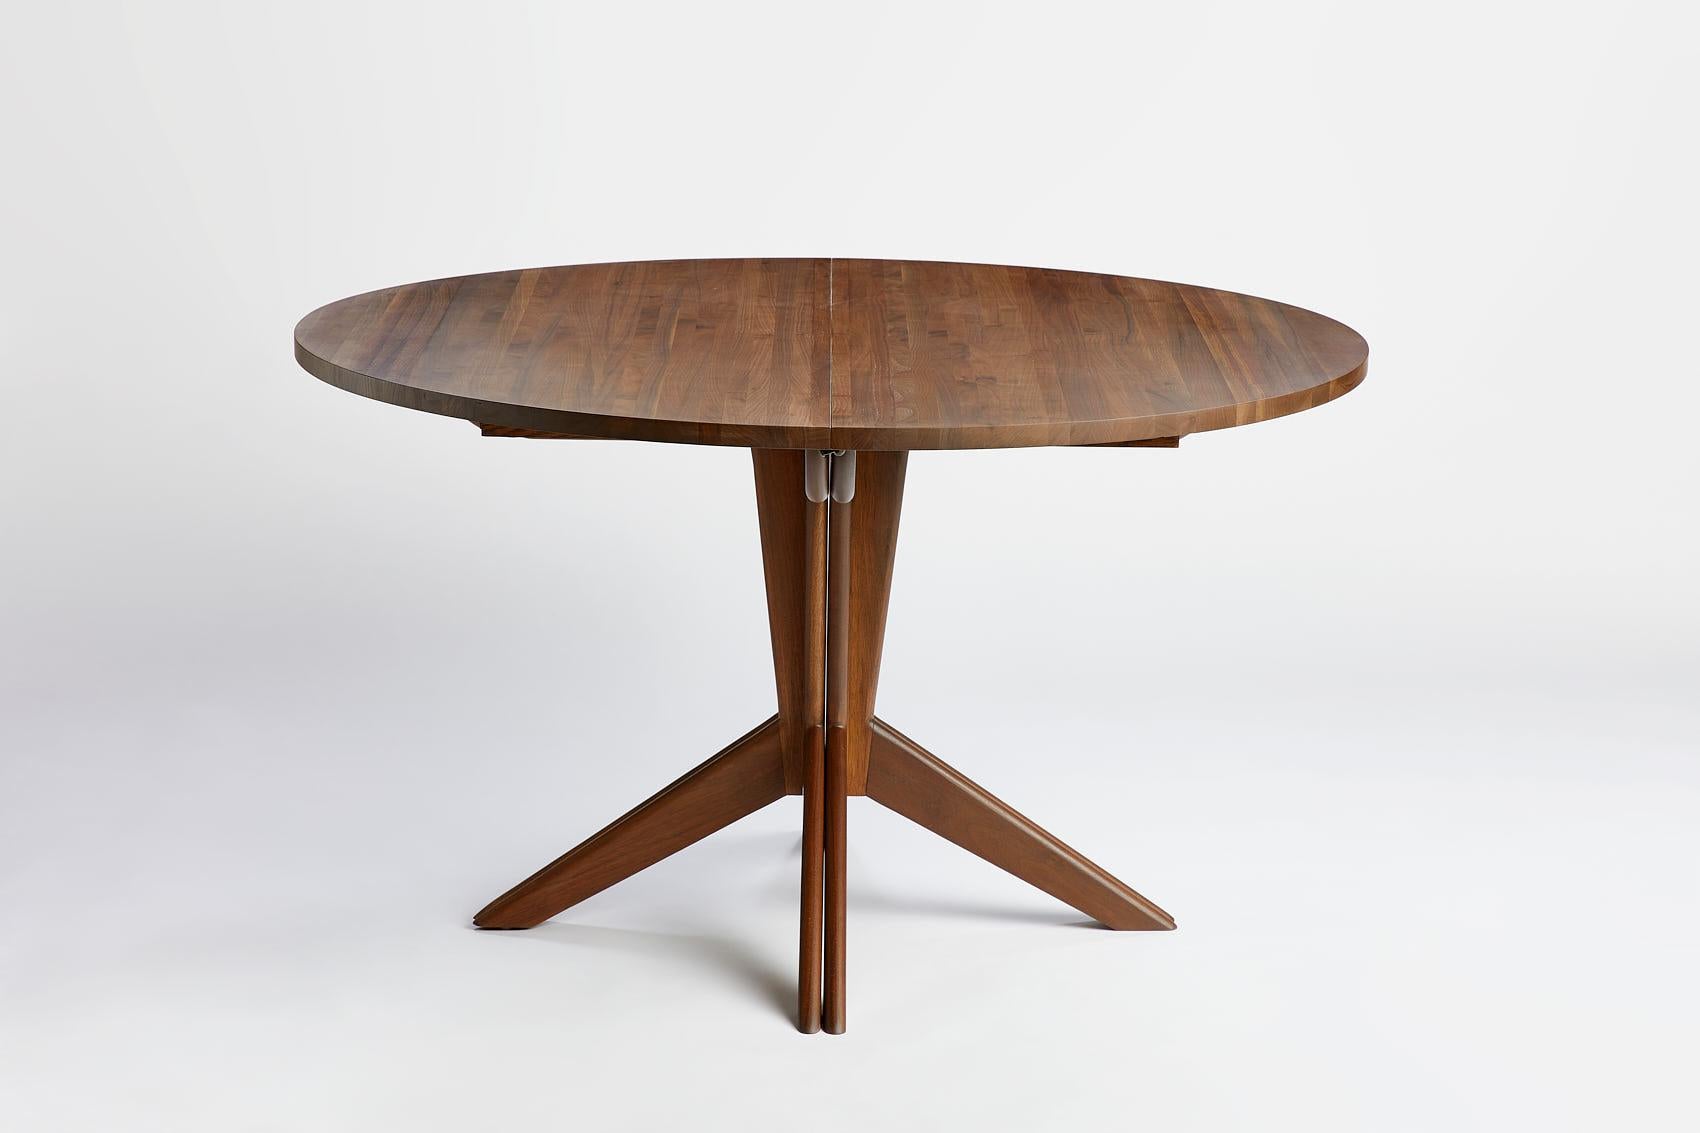 Designed by Mel Smilow in 1956, this completely restored vintage solid walnut extension dining table with a pedestal base is beautifully versatile. The simplicity of the table’s base splits and expands to accommodate 1-3 leaves. The table's solid